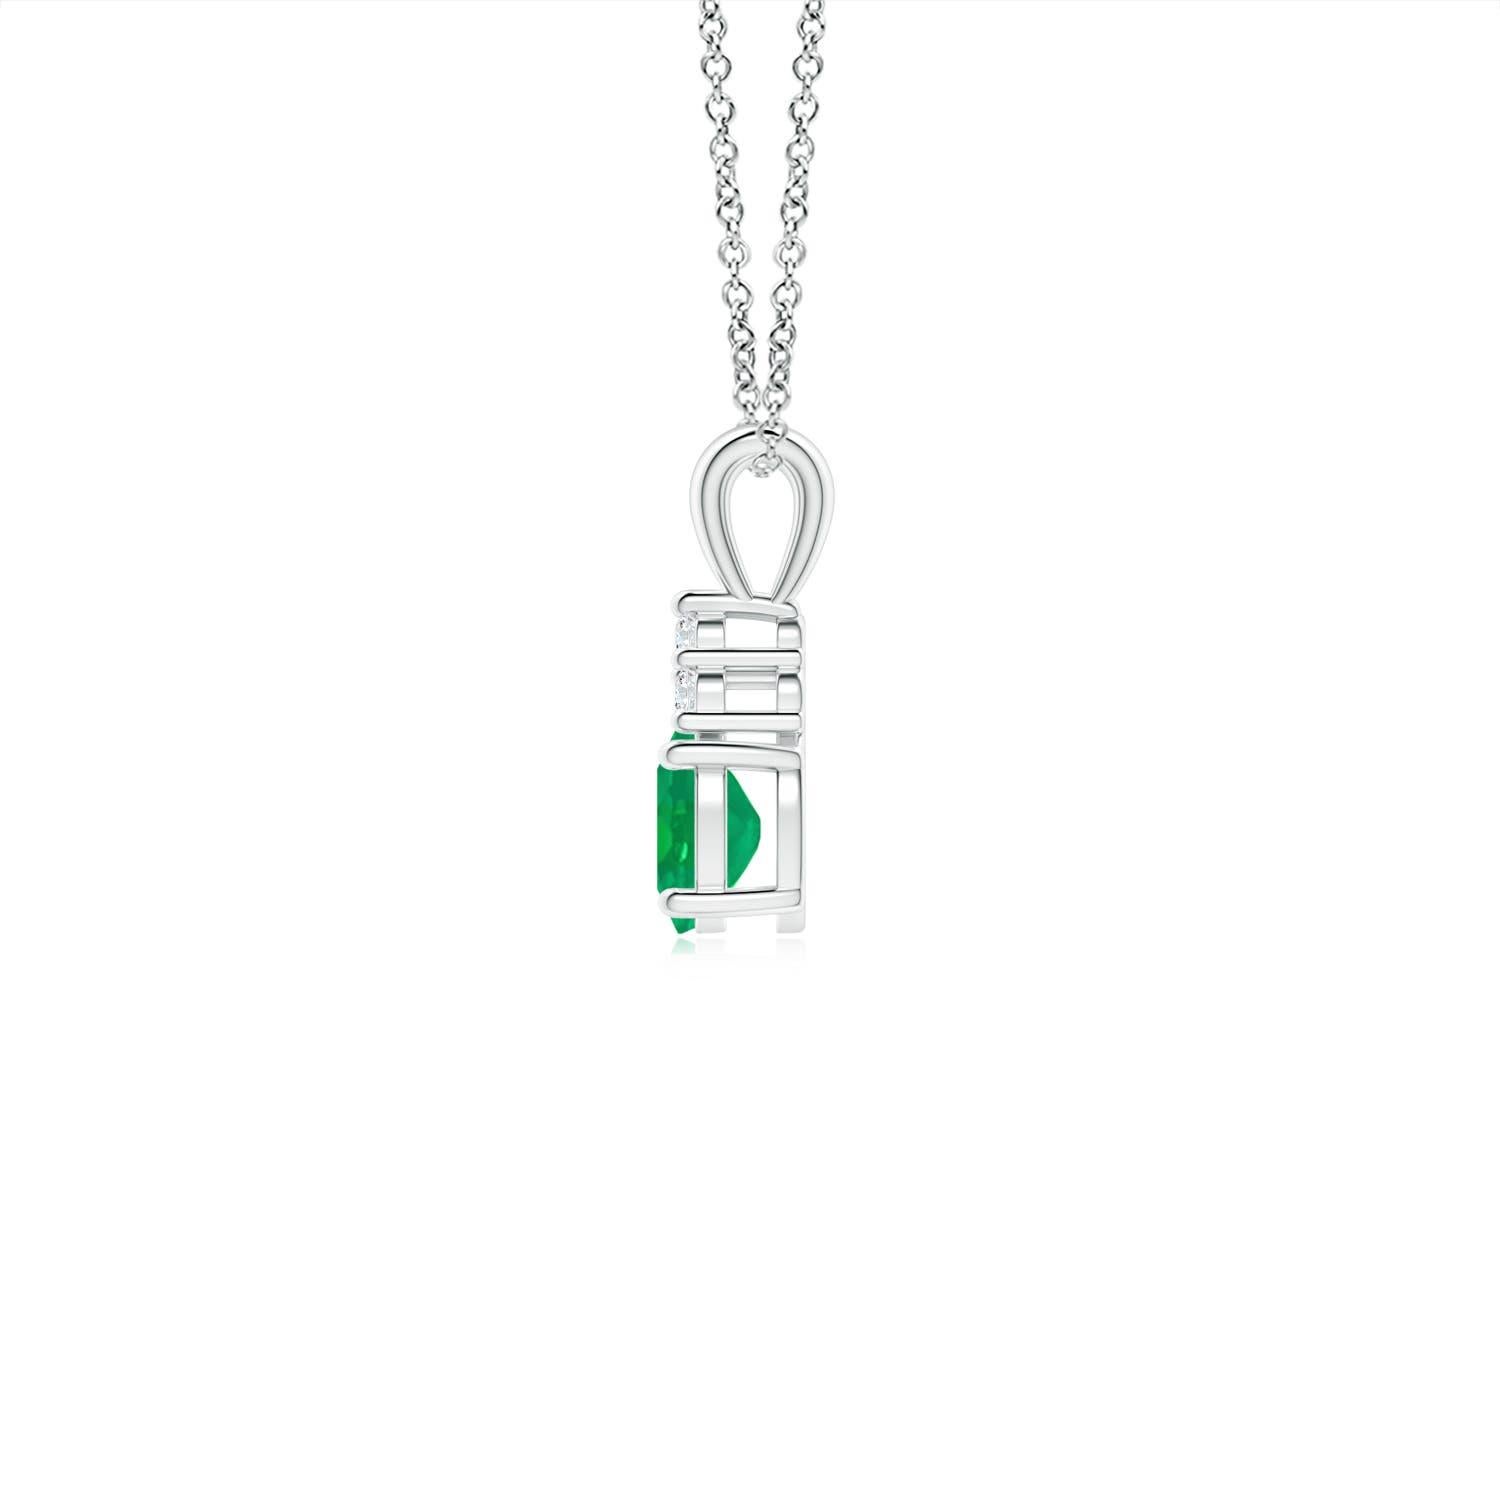 Set in platinum, this classic solitaire emerald pendant showcases the perfect blend of style and elegance. It features a lush green emerald adorned with three sparkling round diamonds on the top. Linked to a lustrous v-bale, this four-prong set